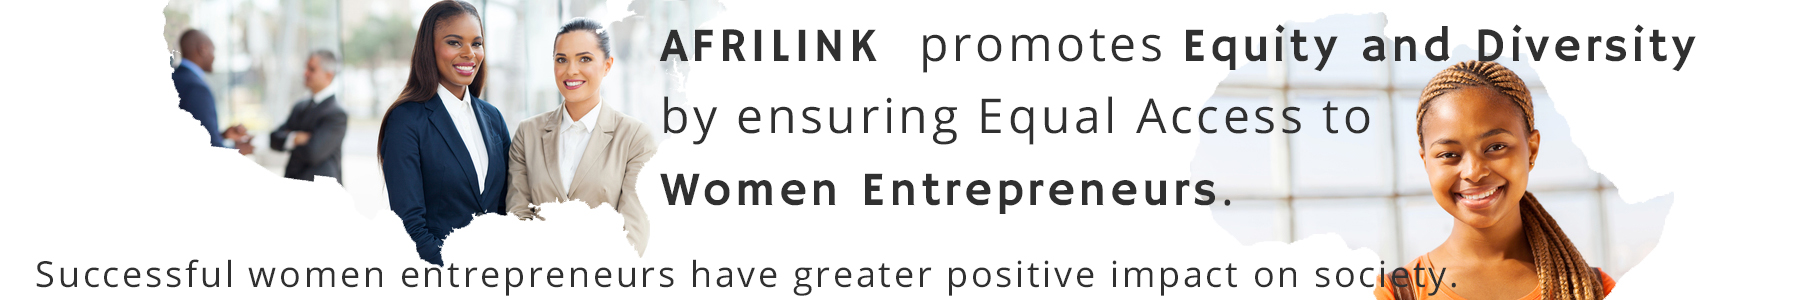 Afrilink - promoting equity and diversity